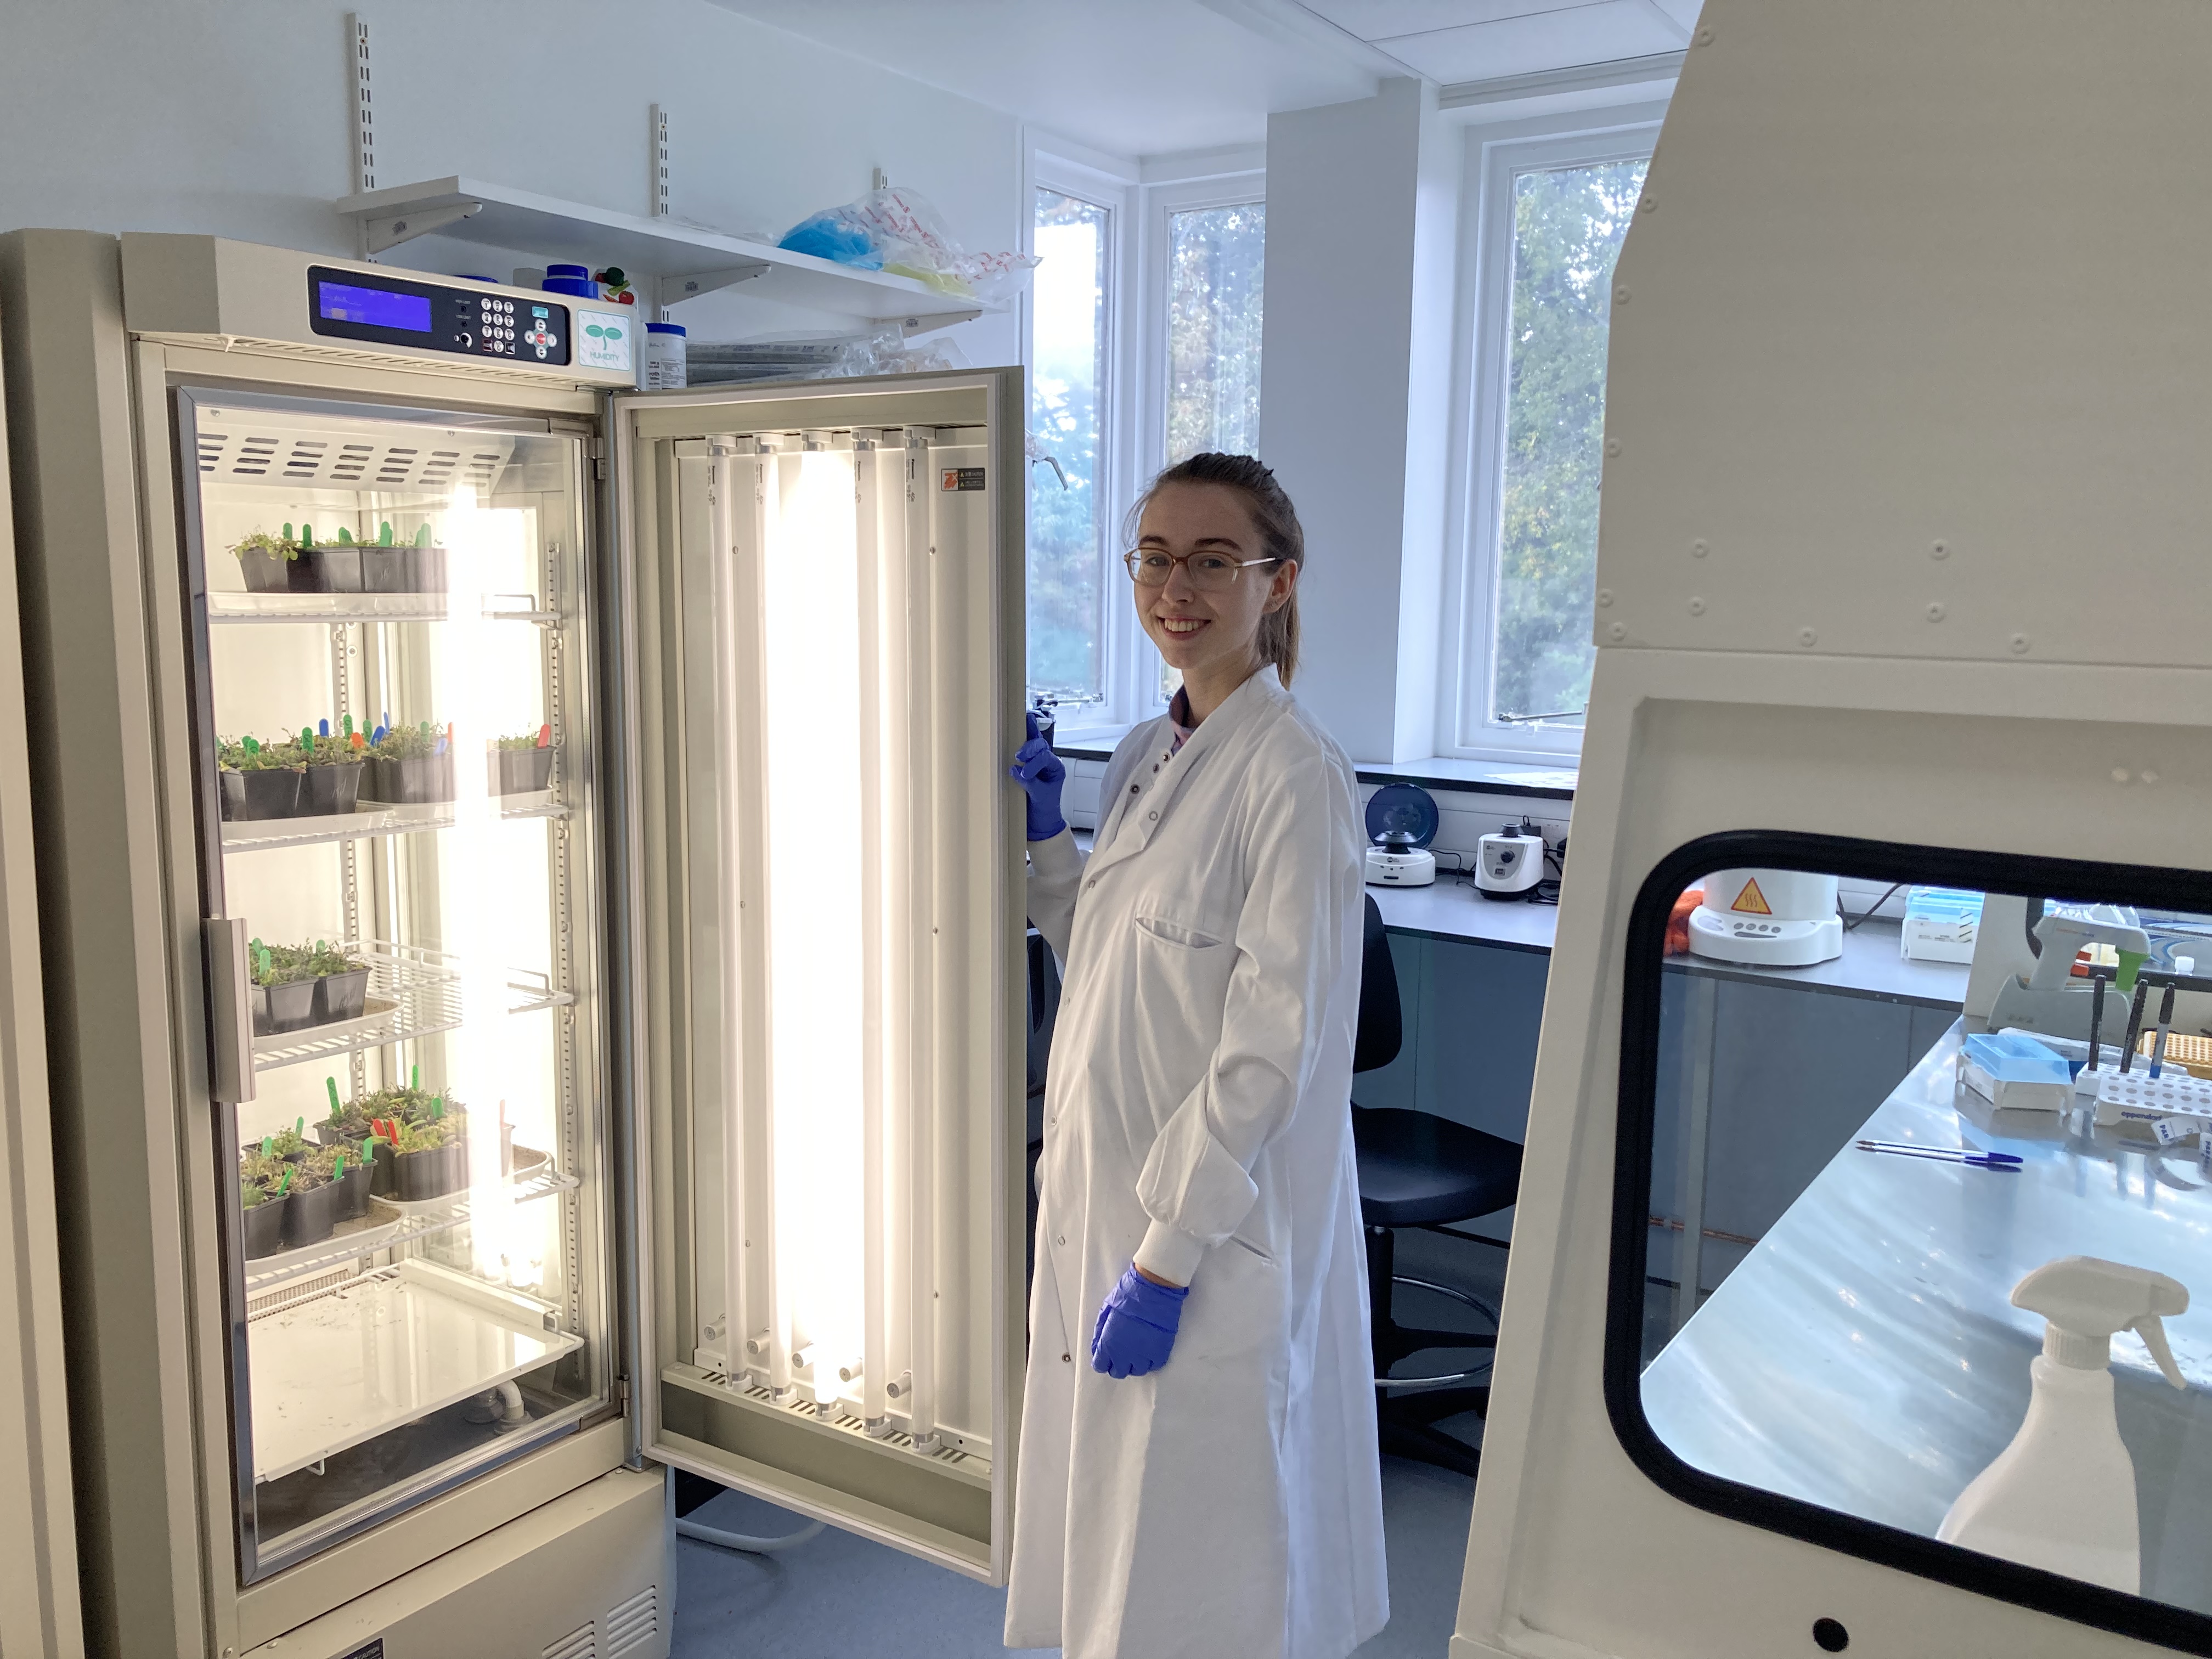 Scientist at University of Kent's Biotechnology Hub opening door to cabinet containing plants in the laboratory